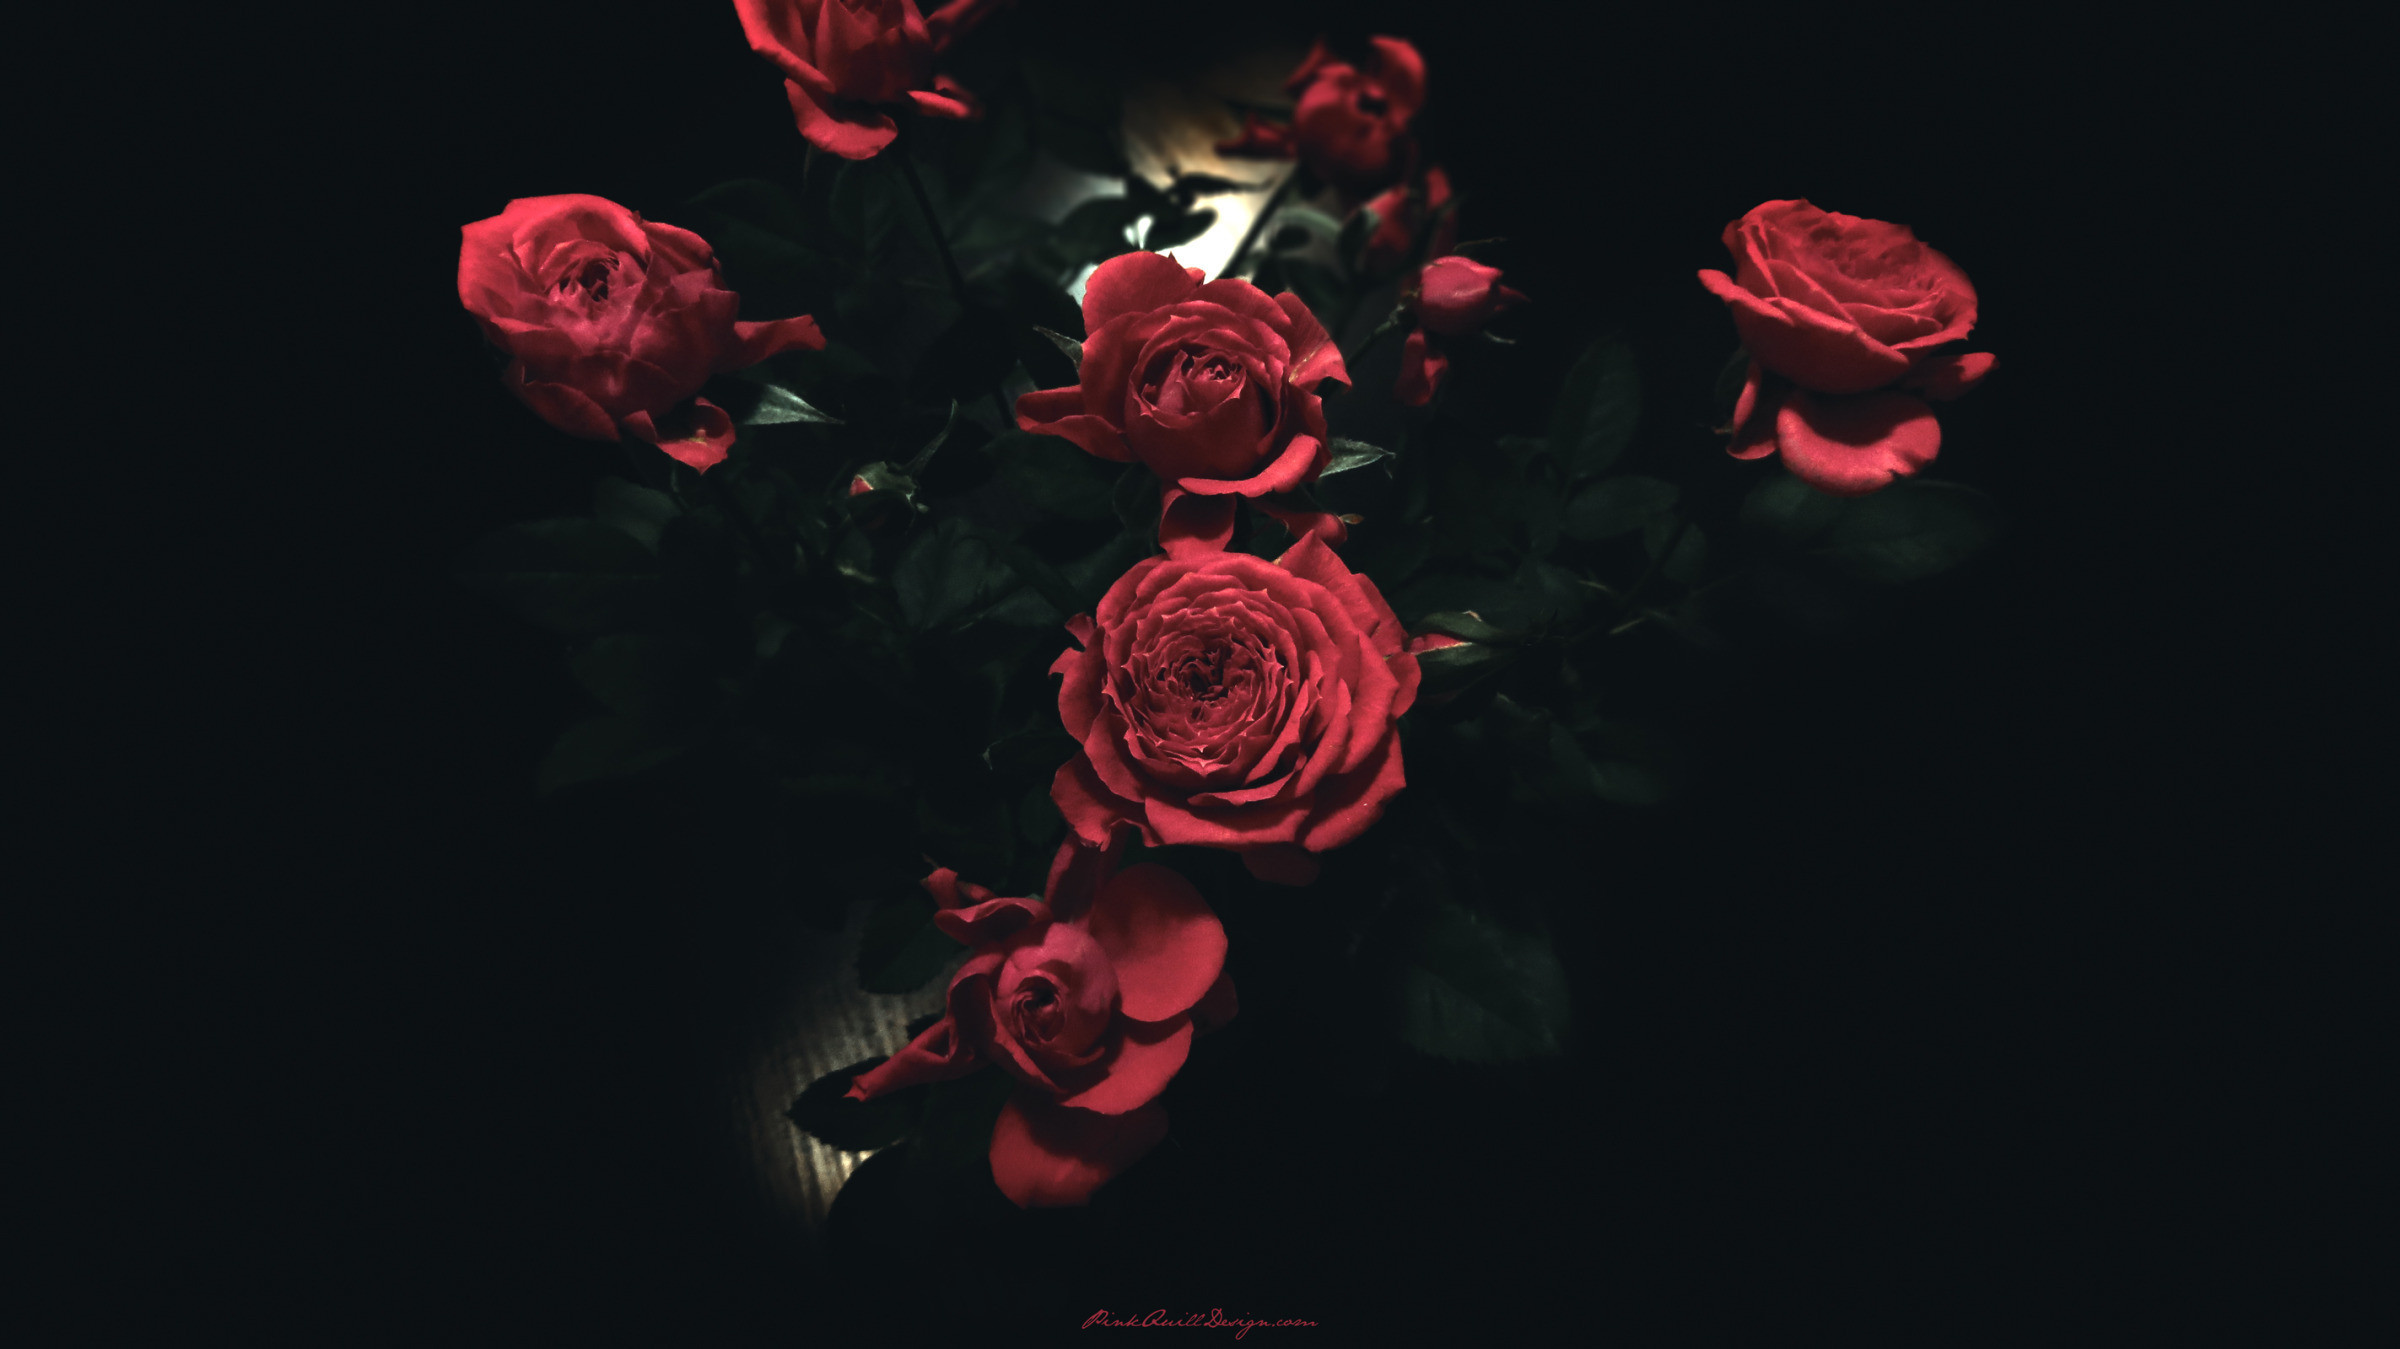 2400x1349 Black Wallpaper with Pink Roses Lovely Eletragesi Dark Red Roses Tumblr